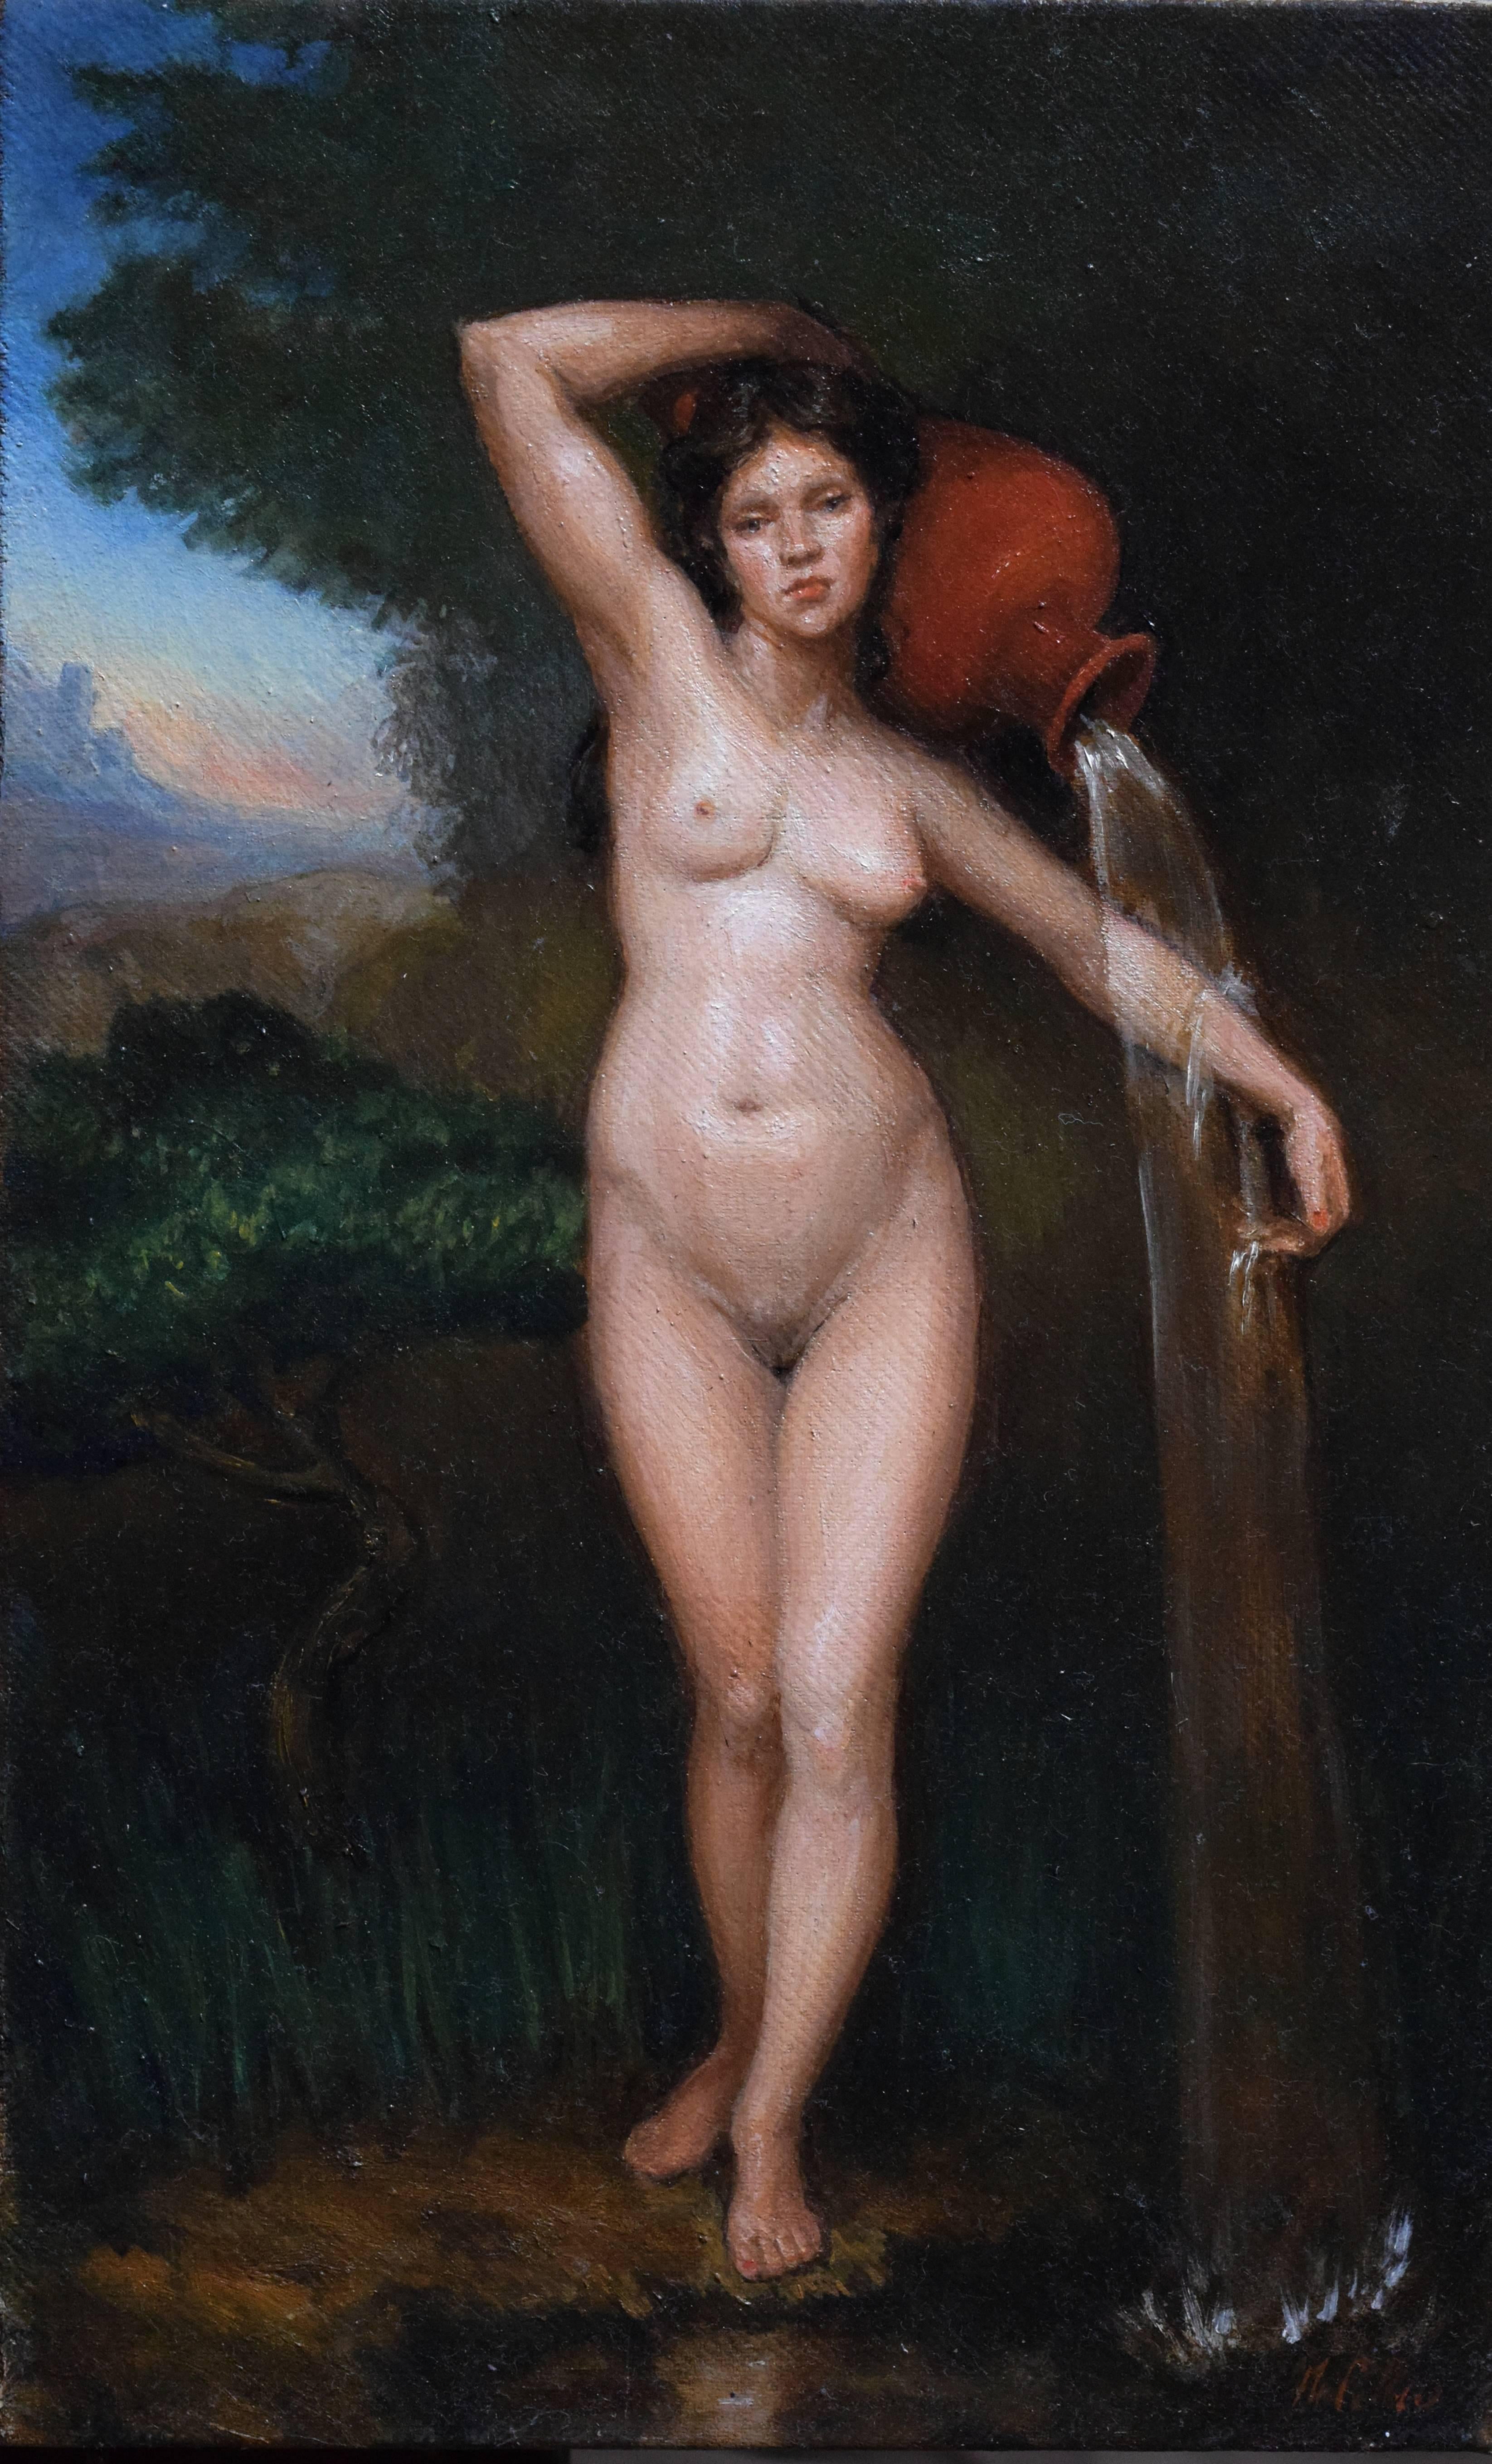 Matthew James Collins Nude Painting - Song of the South